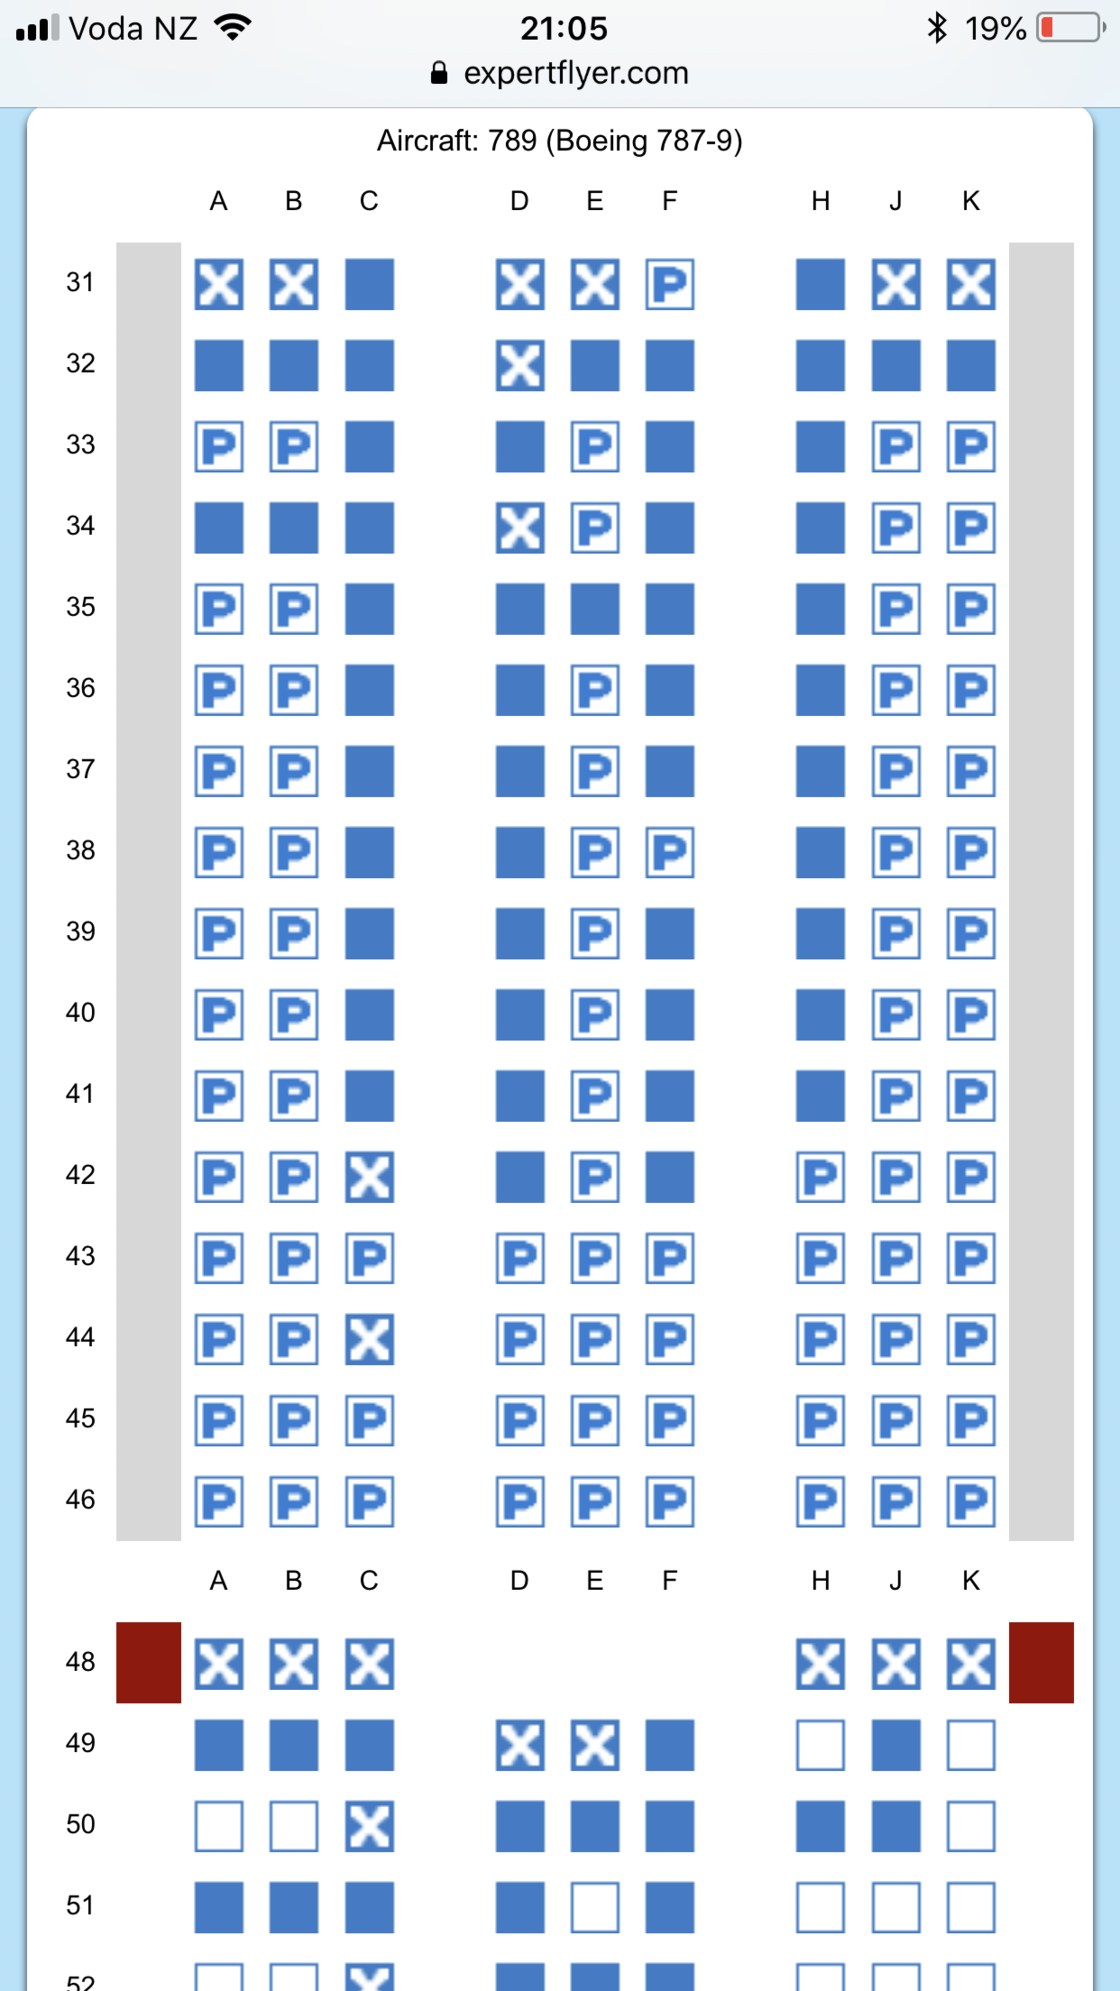 unusual economy seat allocations - large group? - FlyerTalk Forums